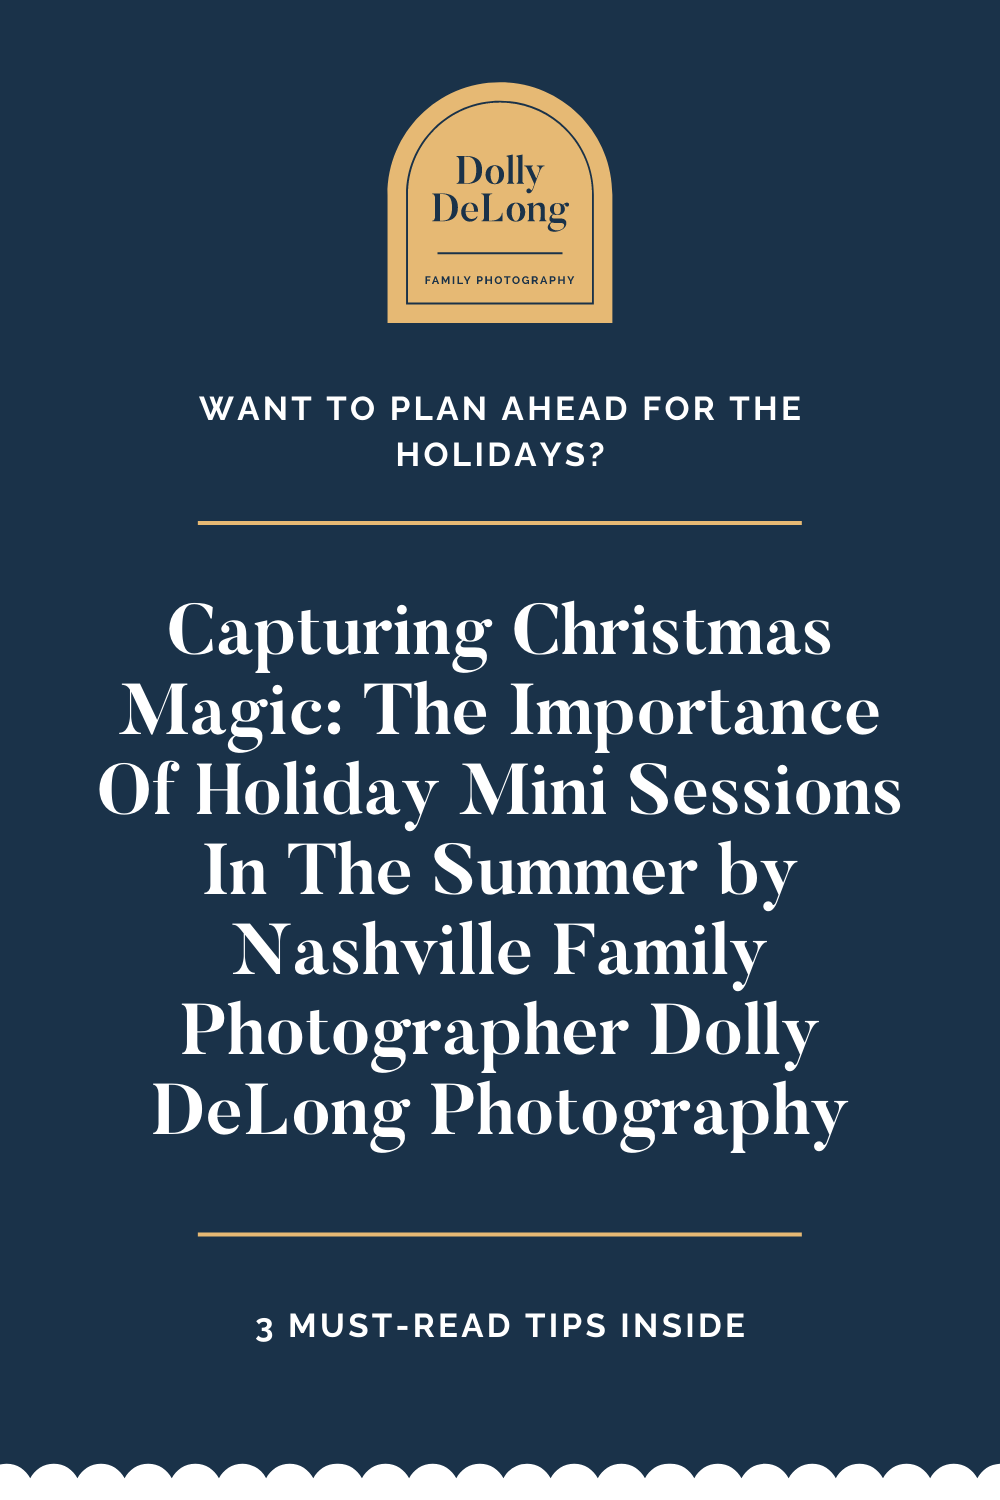 Capturing Christmas Magic: The Importance Of Holiday Mini Sessions In The Summer by Nashville Family Photographer Dolly DeLong Photography Pinterest Pin